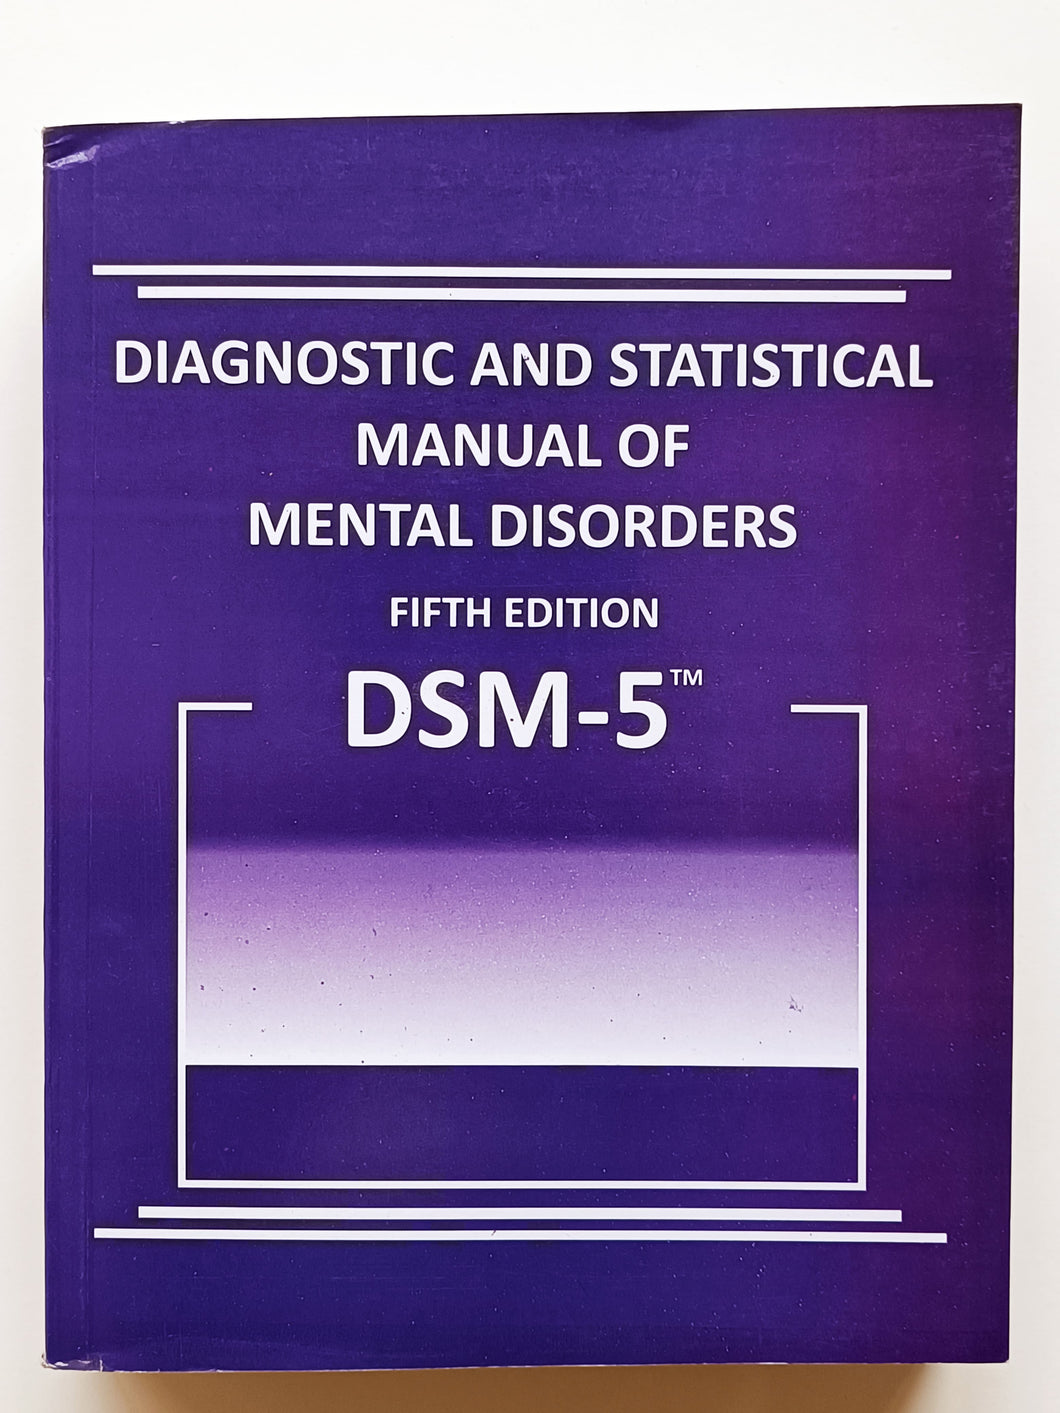 Diagnostic and Statistical Manual of Mental Disorders 5th Edition DSM-5